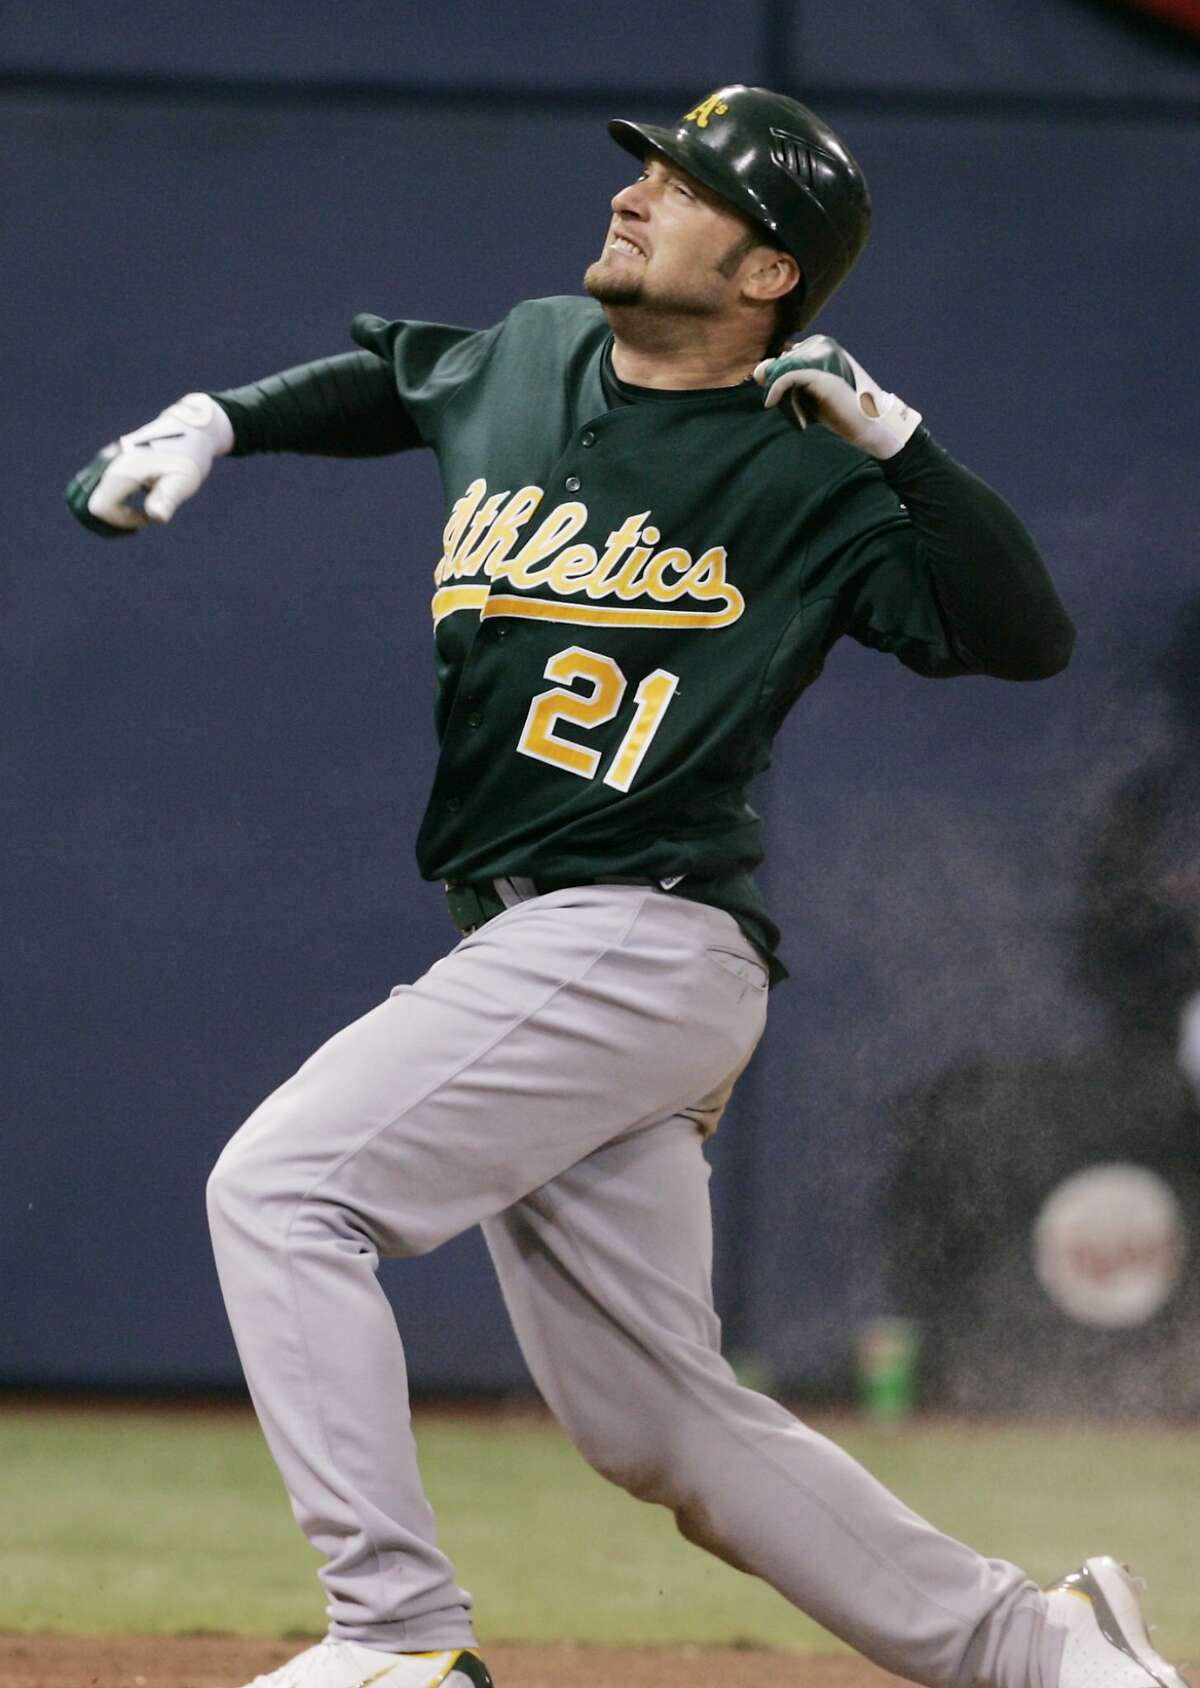 Oakland Athletics' Mark Kotsay celebrates his two-run inside-the-park homer off Minnesota Twins' Pat Neshek in seventh inning in Game 2 of the American League Division Series baseball game Wednesday, Oct. 4, 2006 in Minneapolis. (AP Photo/Jim Mone) Ran on: 10-08-2006